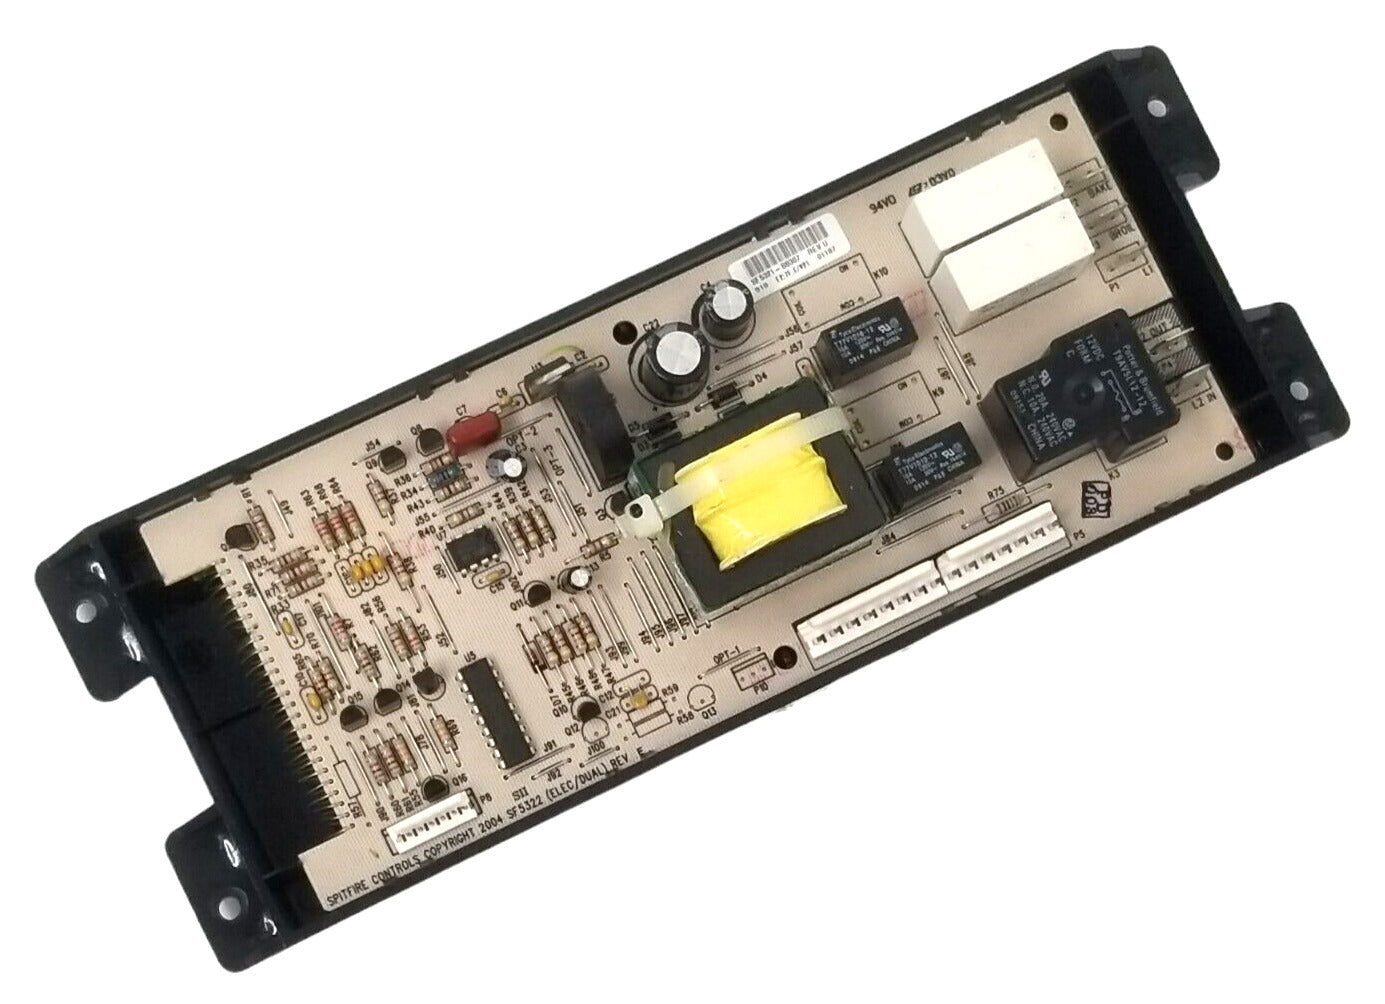 OEM Replacement for Kenmore Range Control 316418307